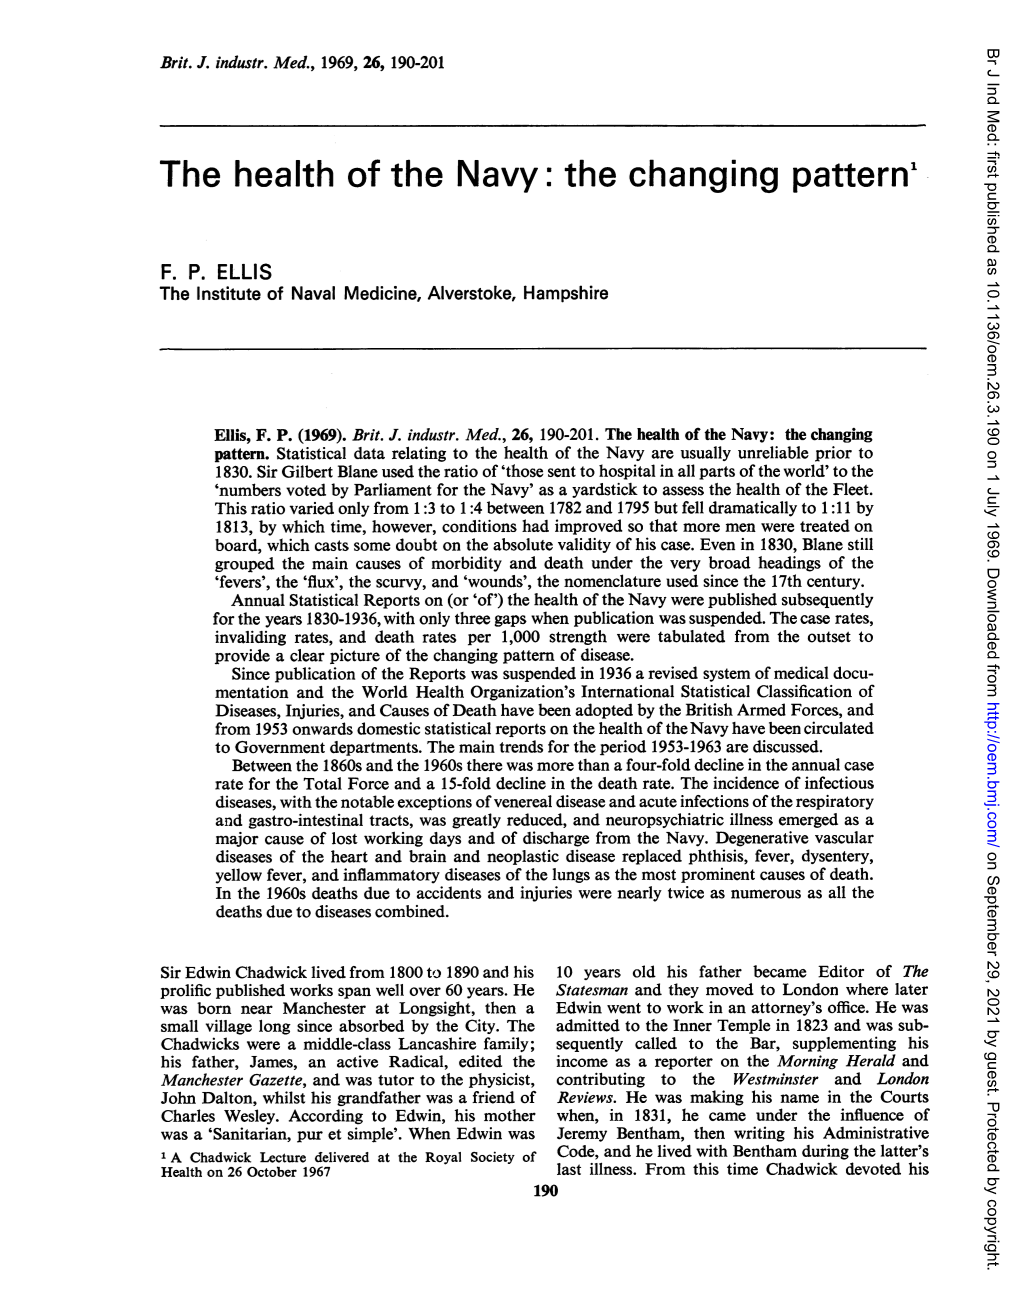 The Health of the Navy: the Changing Pattern1